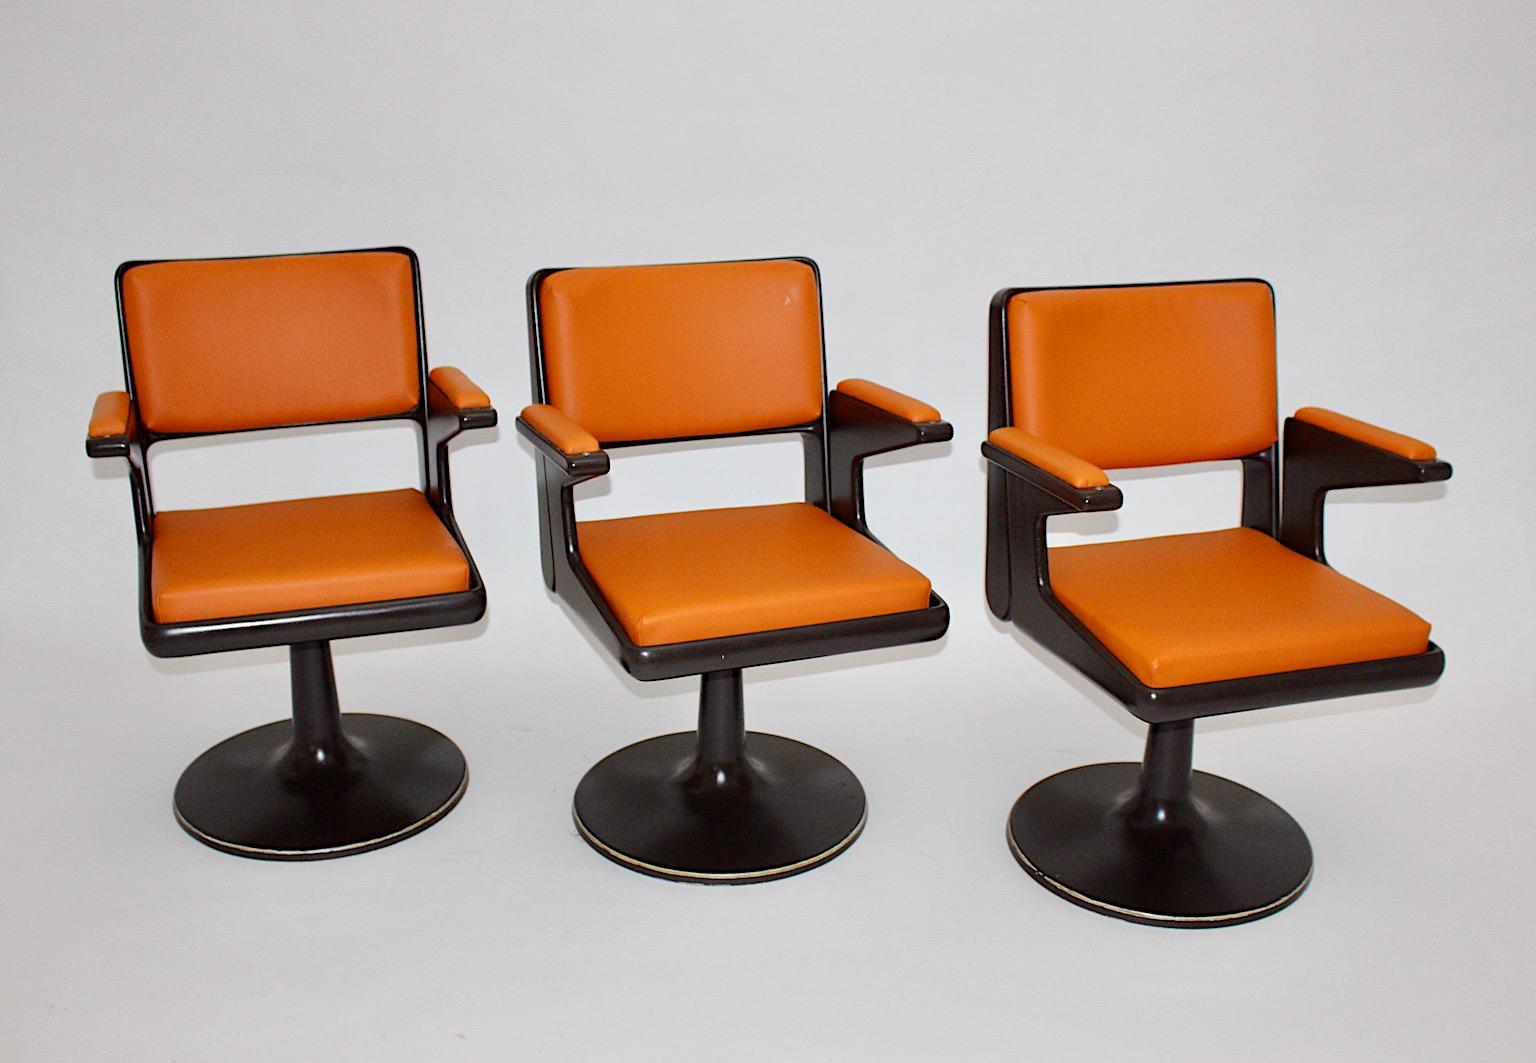 Space Age vintage swivel armchair from brown plastic and orange faux leather seats produced in Germany 1970s.
While the newly covered seats are in very good condition, the chocolate brown plastic seat frame shows signs of age and use like abrasions